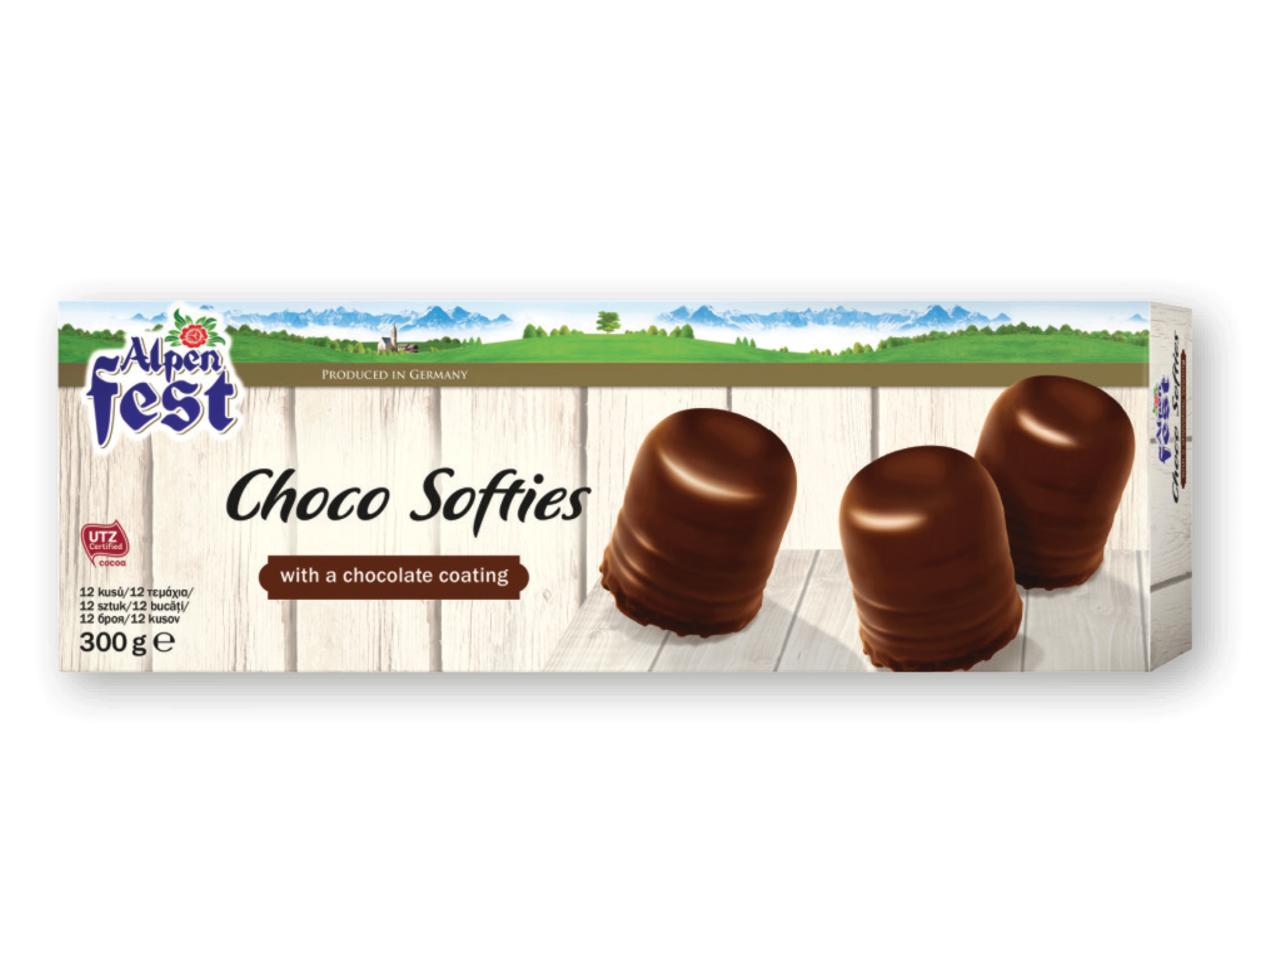 ALPENFEST Choco Softies with Chocolate Coating